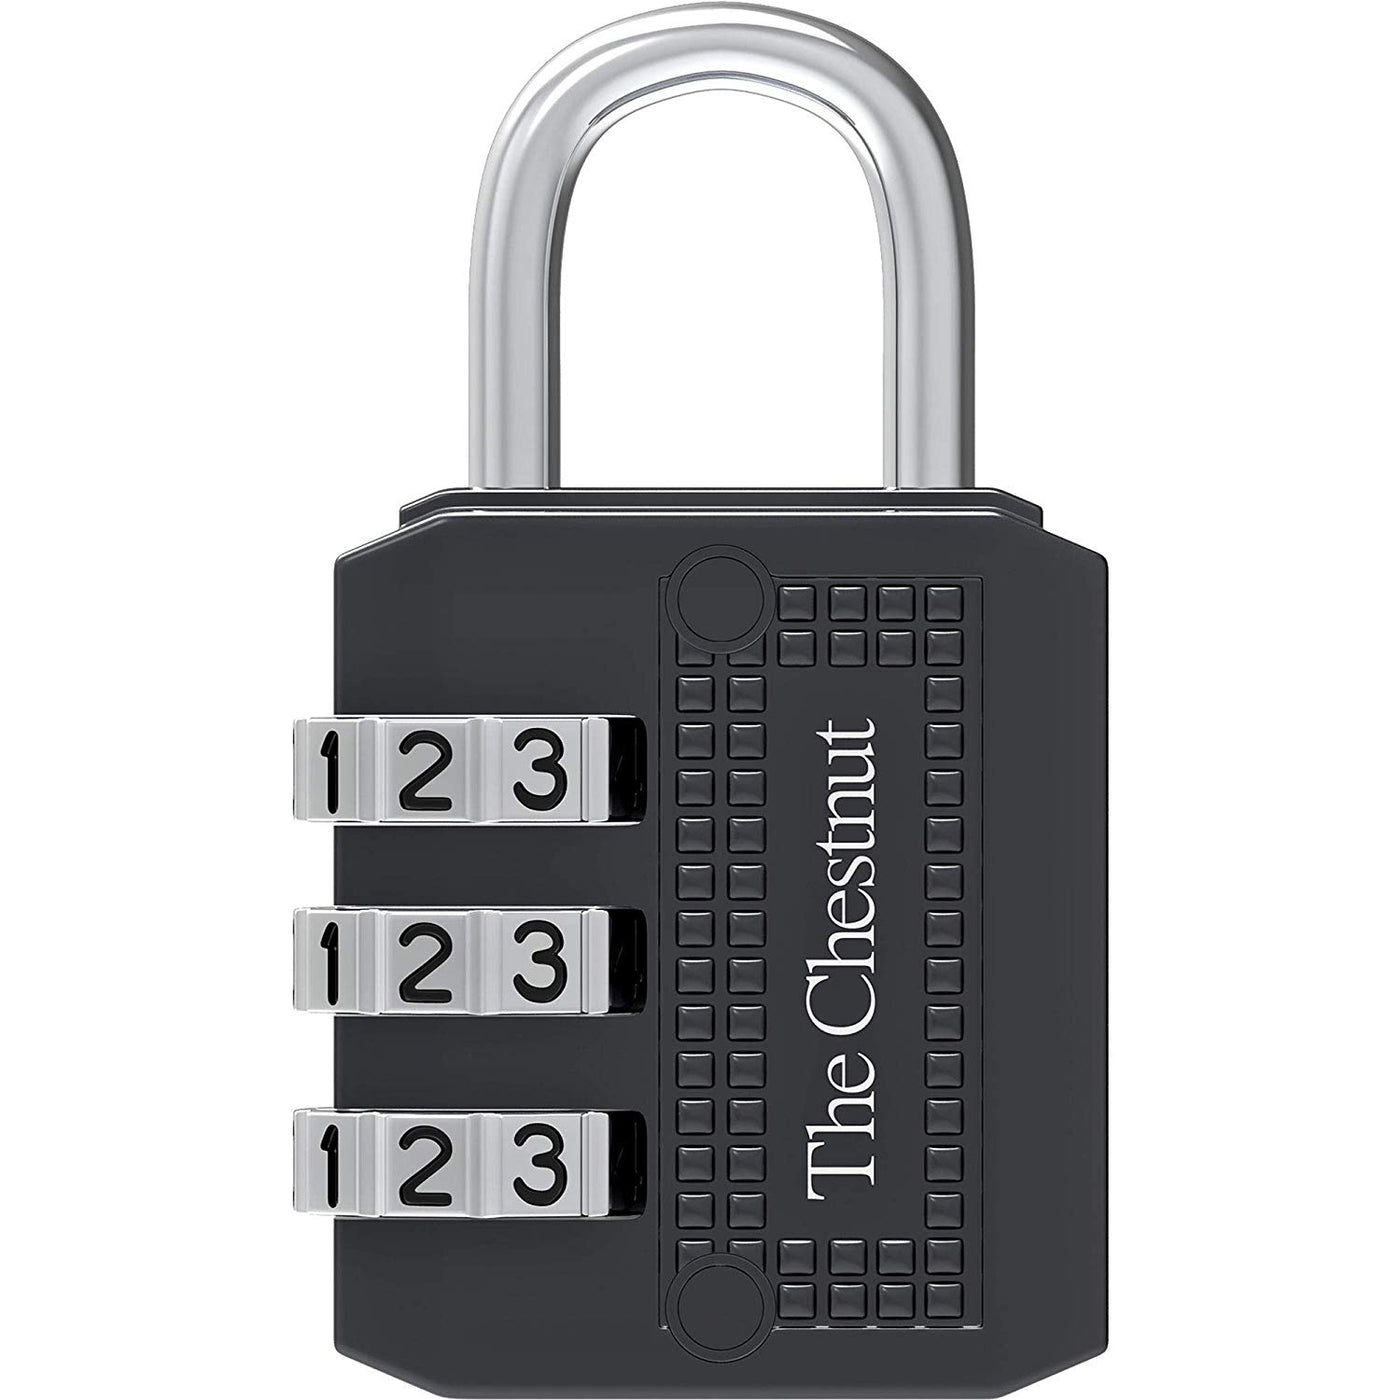 The Truth About Combination Locks - Are Combination Locks Secure